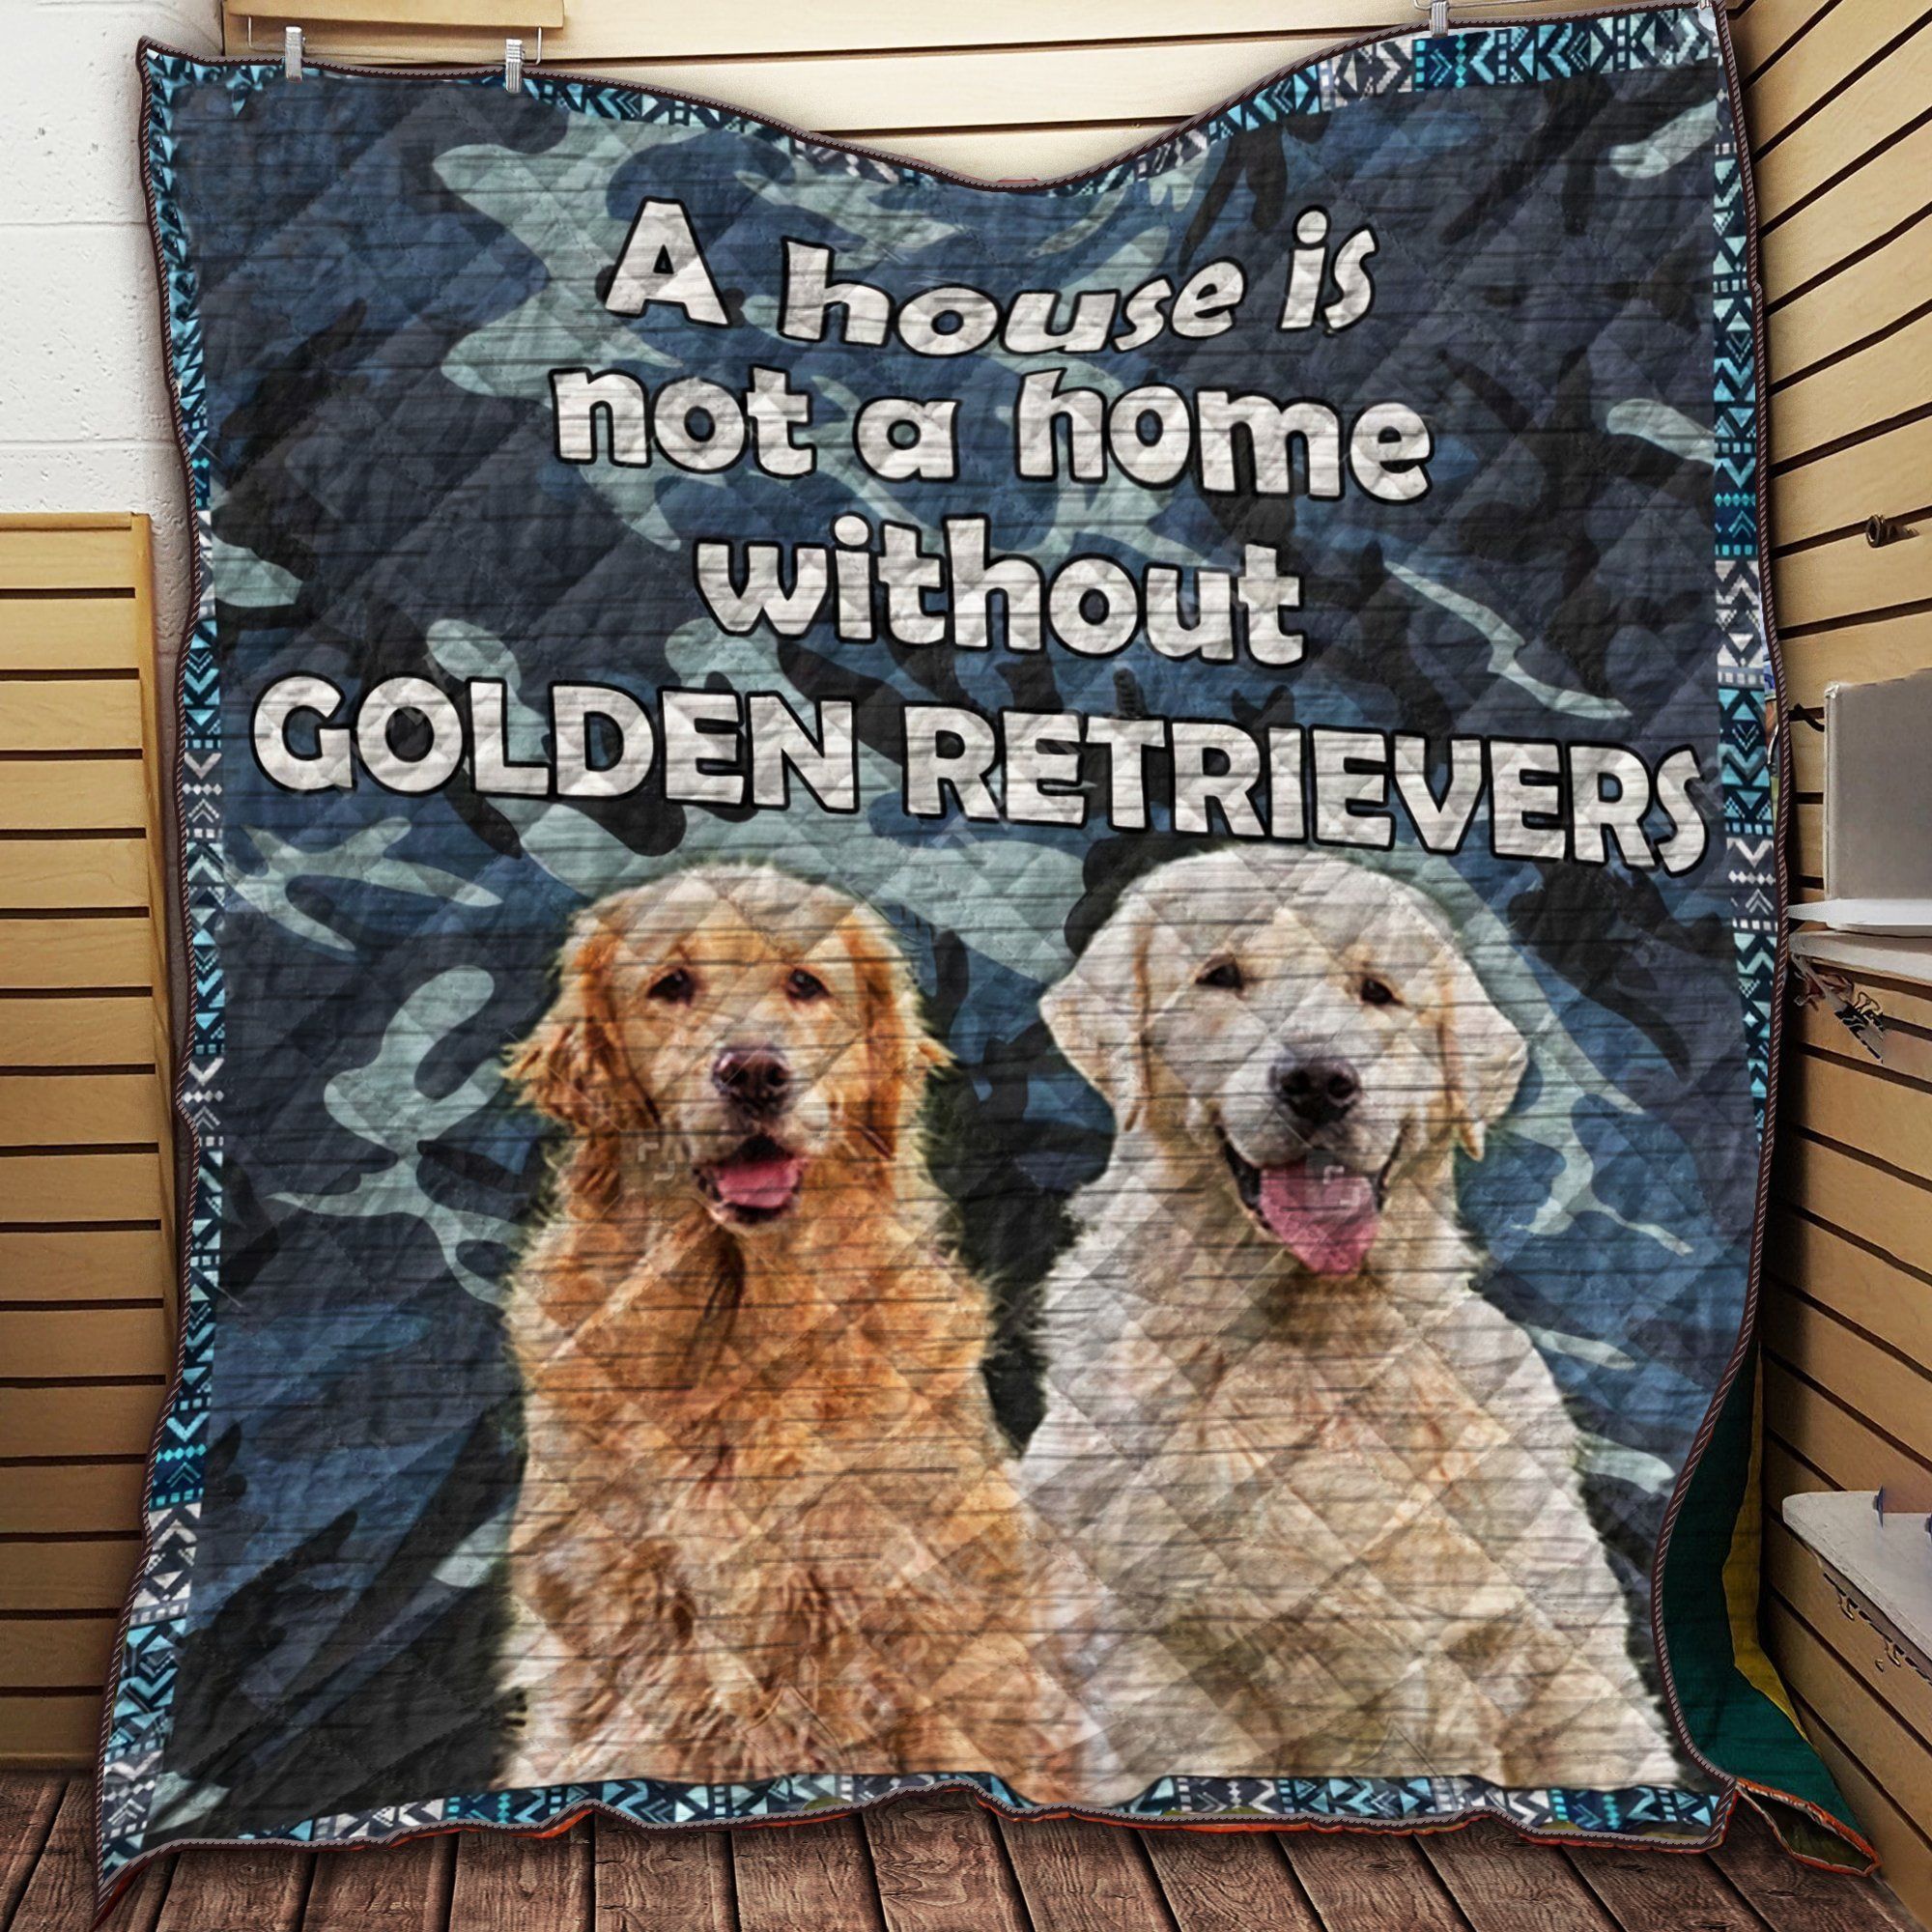 A House Is Not A Home Without Golden Retrievers Quilt Blanket Great Customized Blanket Gifts For Birthday Christmas Thanksgiving